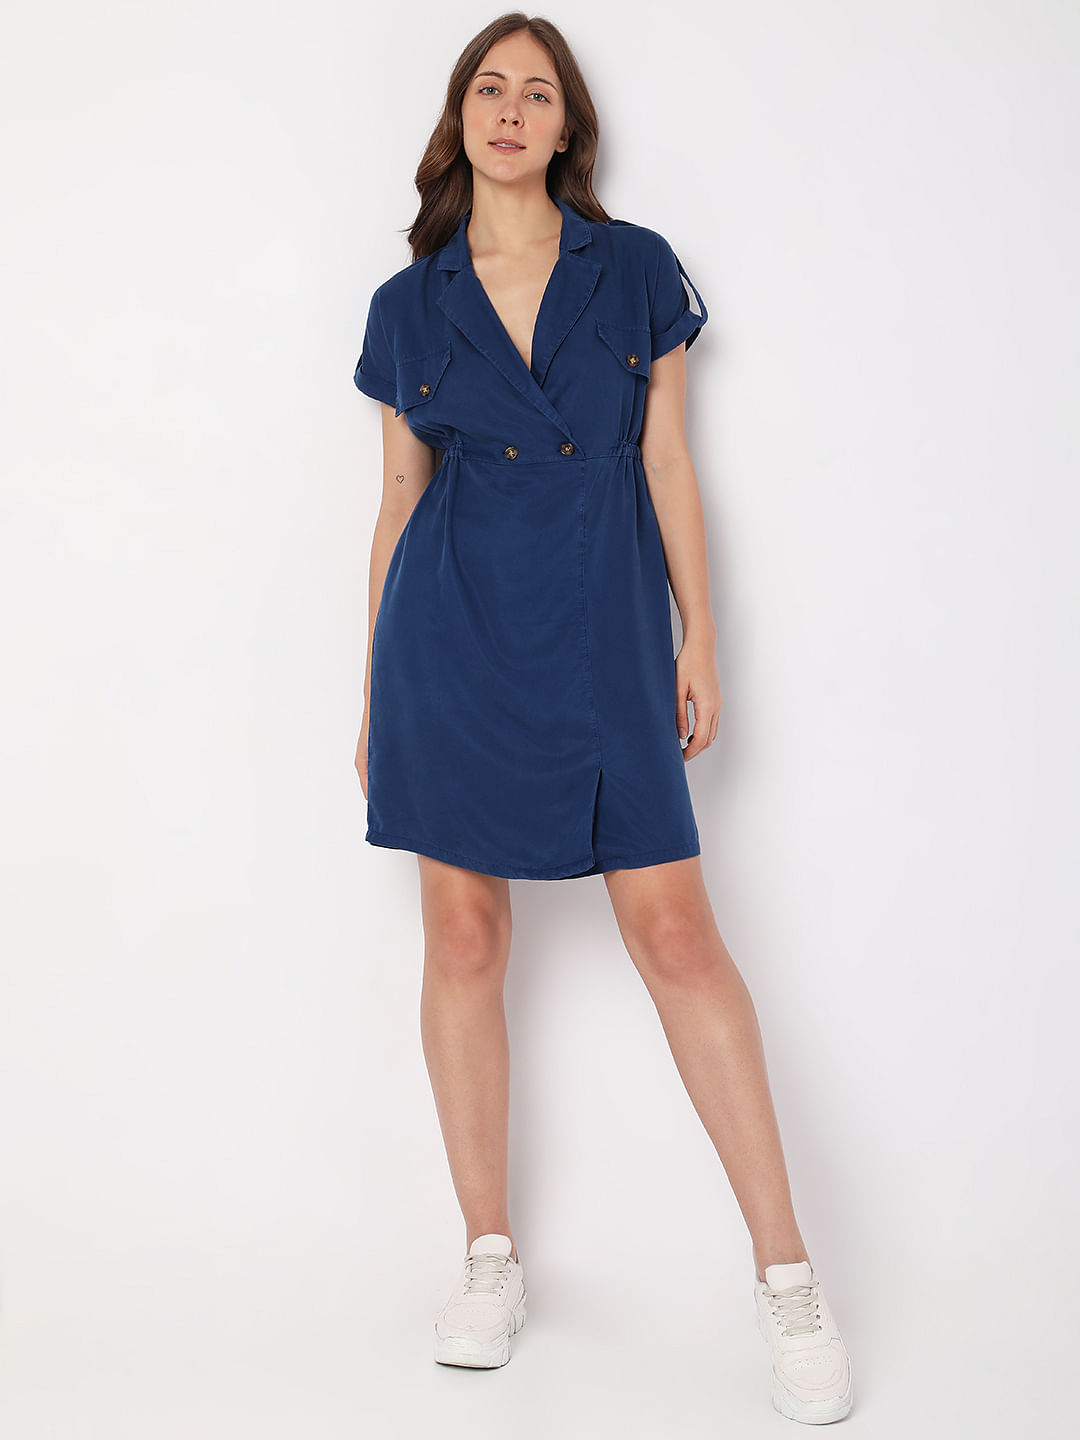 Embroderied one piece party wear dress knee length women daily wear dresses  for home combo one piece for girls party wear denim dress for women stylish  styles dress jeans top frock frock